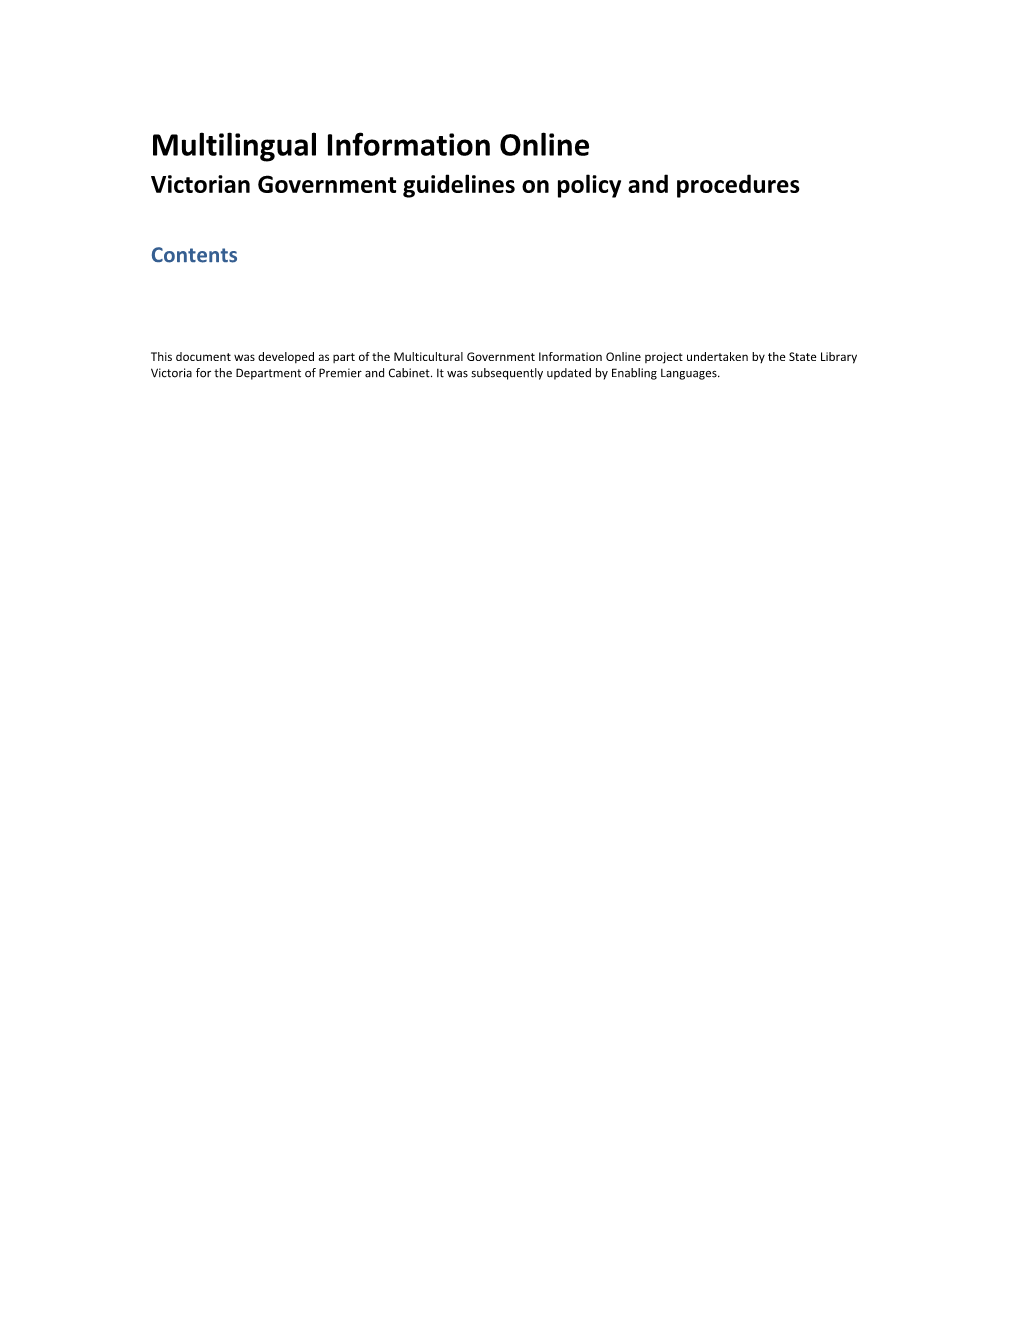 Victorian Government Guidelines on Policy and Procedures